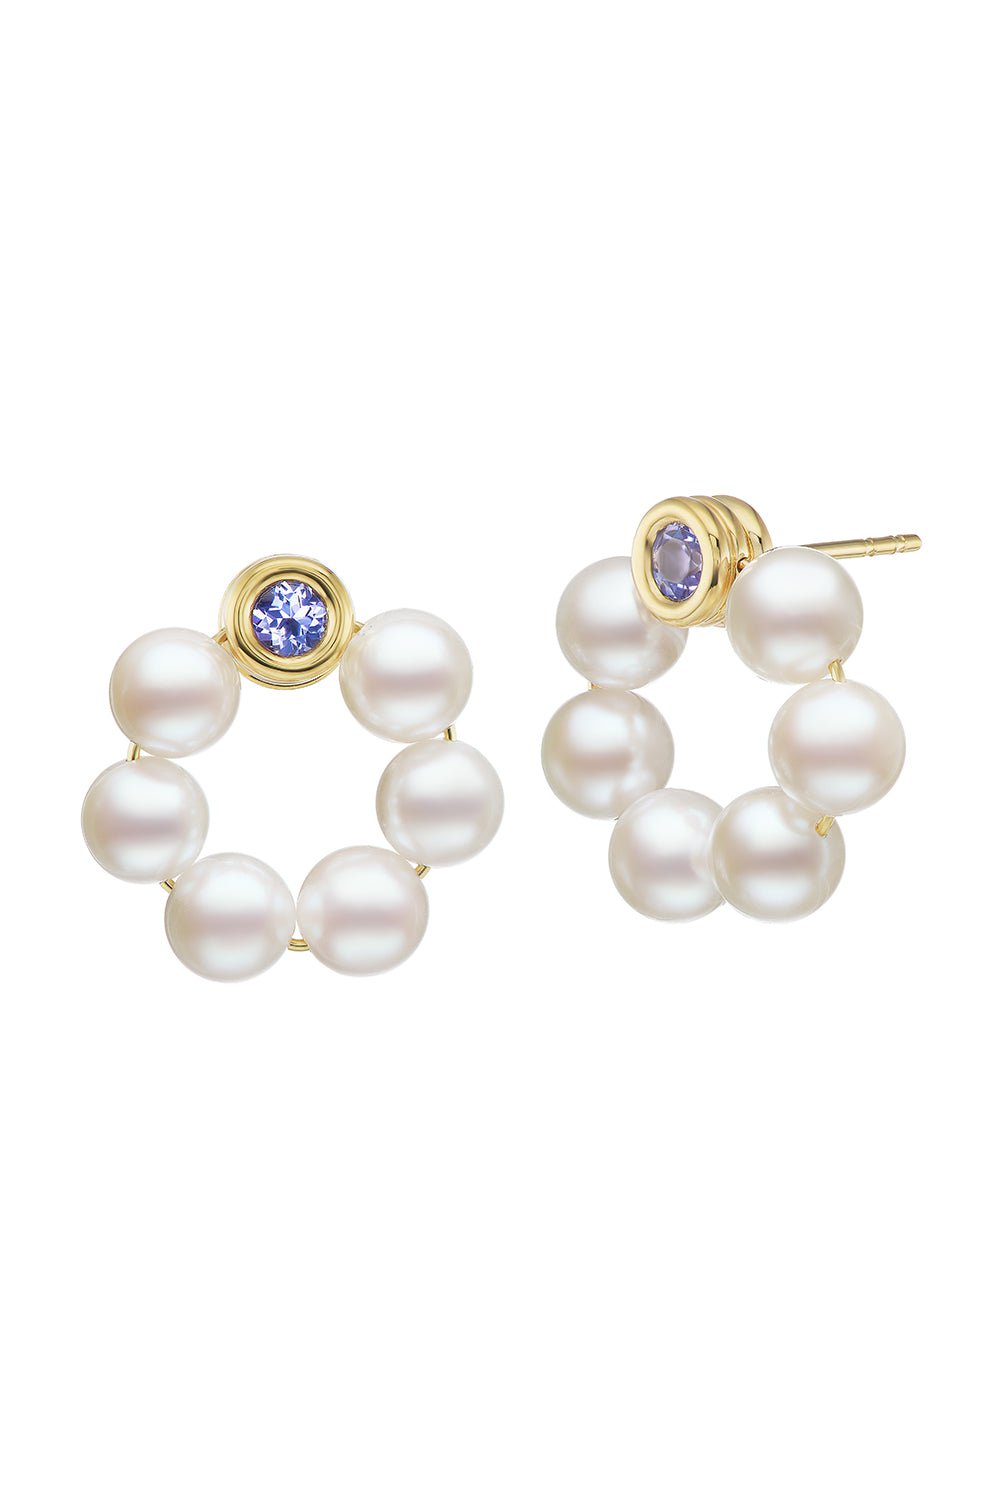 BECK JEWELS-Grotto Pearl Tanzanite Earrings-YELLOW GOLD